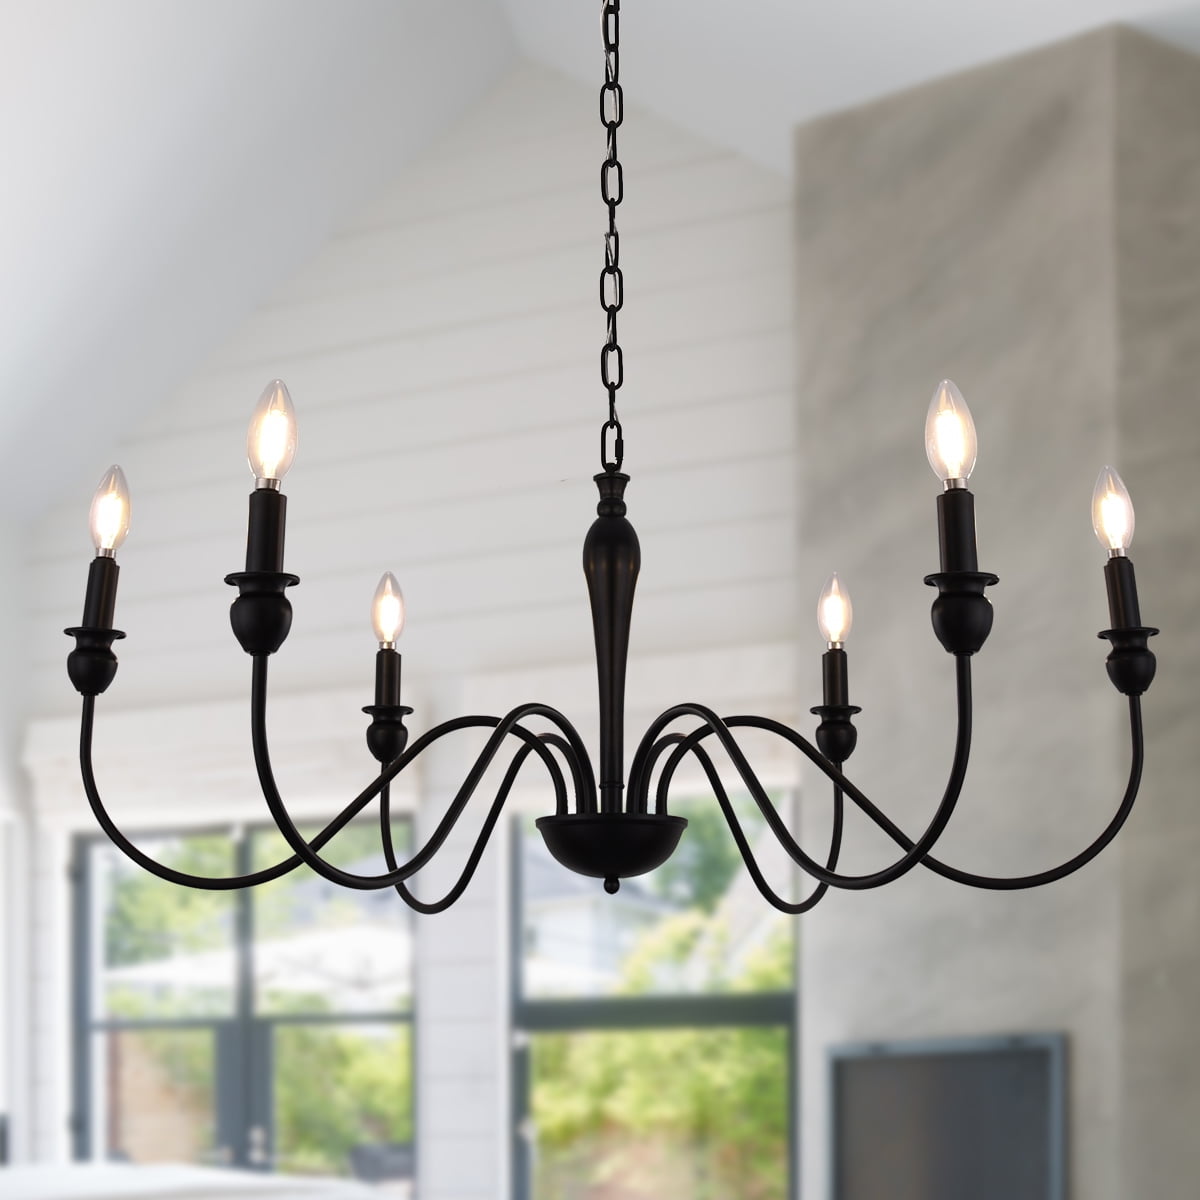 Real Candle Chandelier Lighting - Home Design Ideas